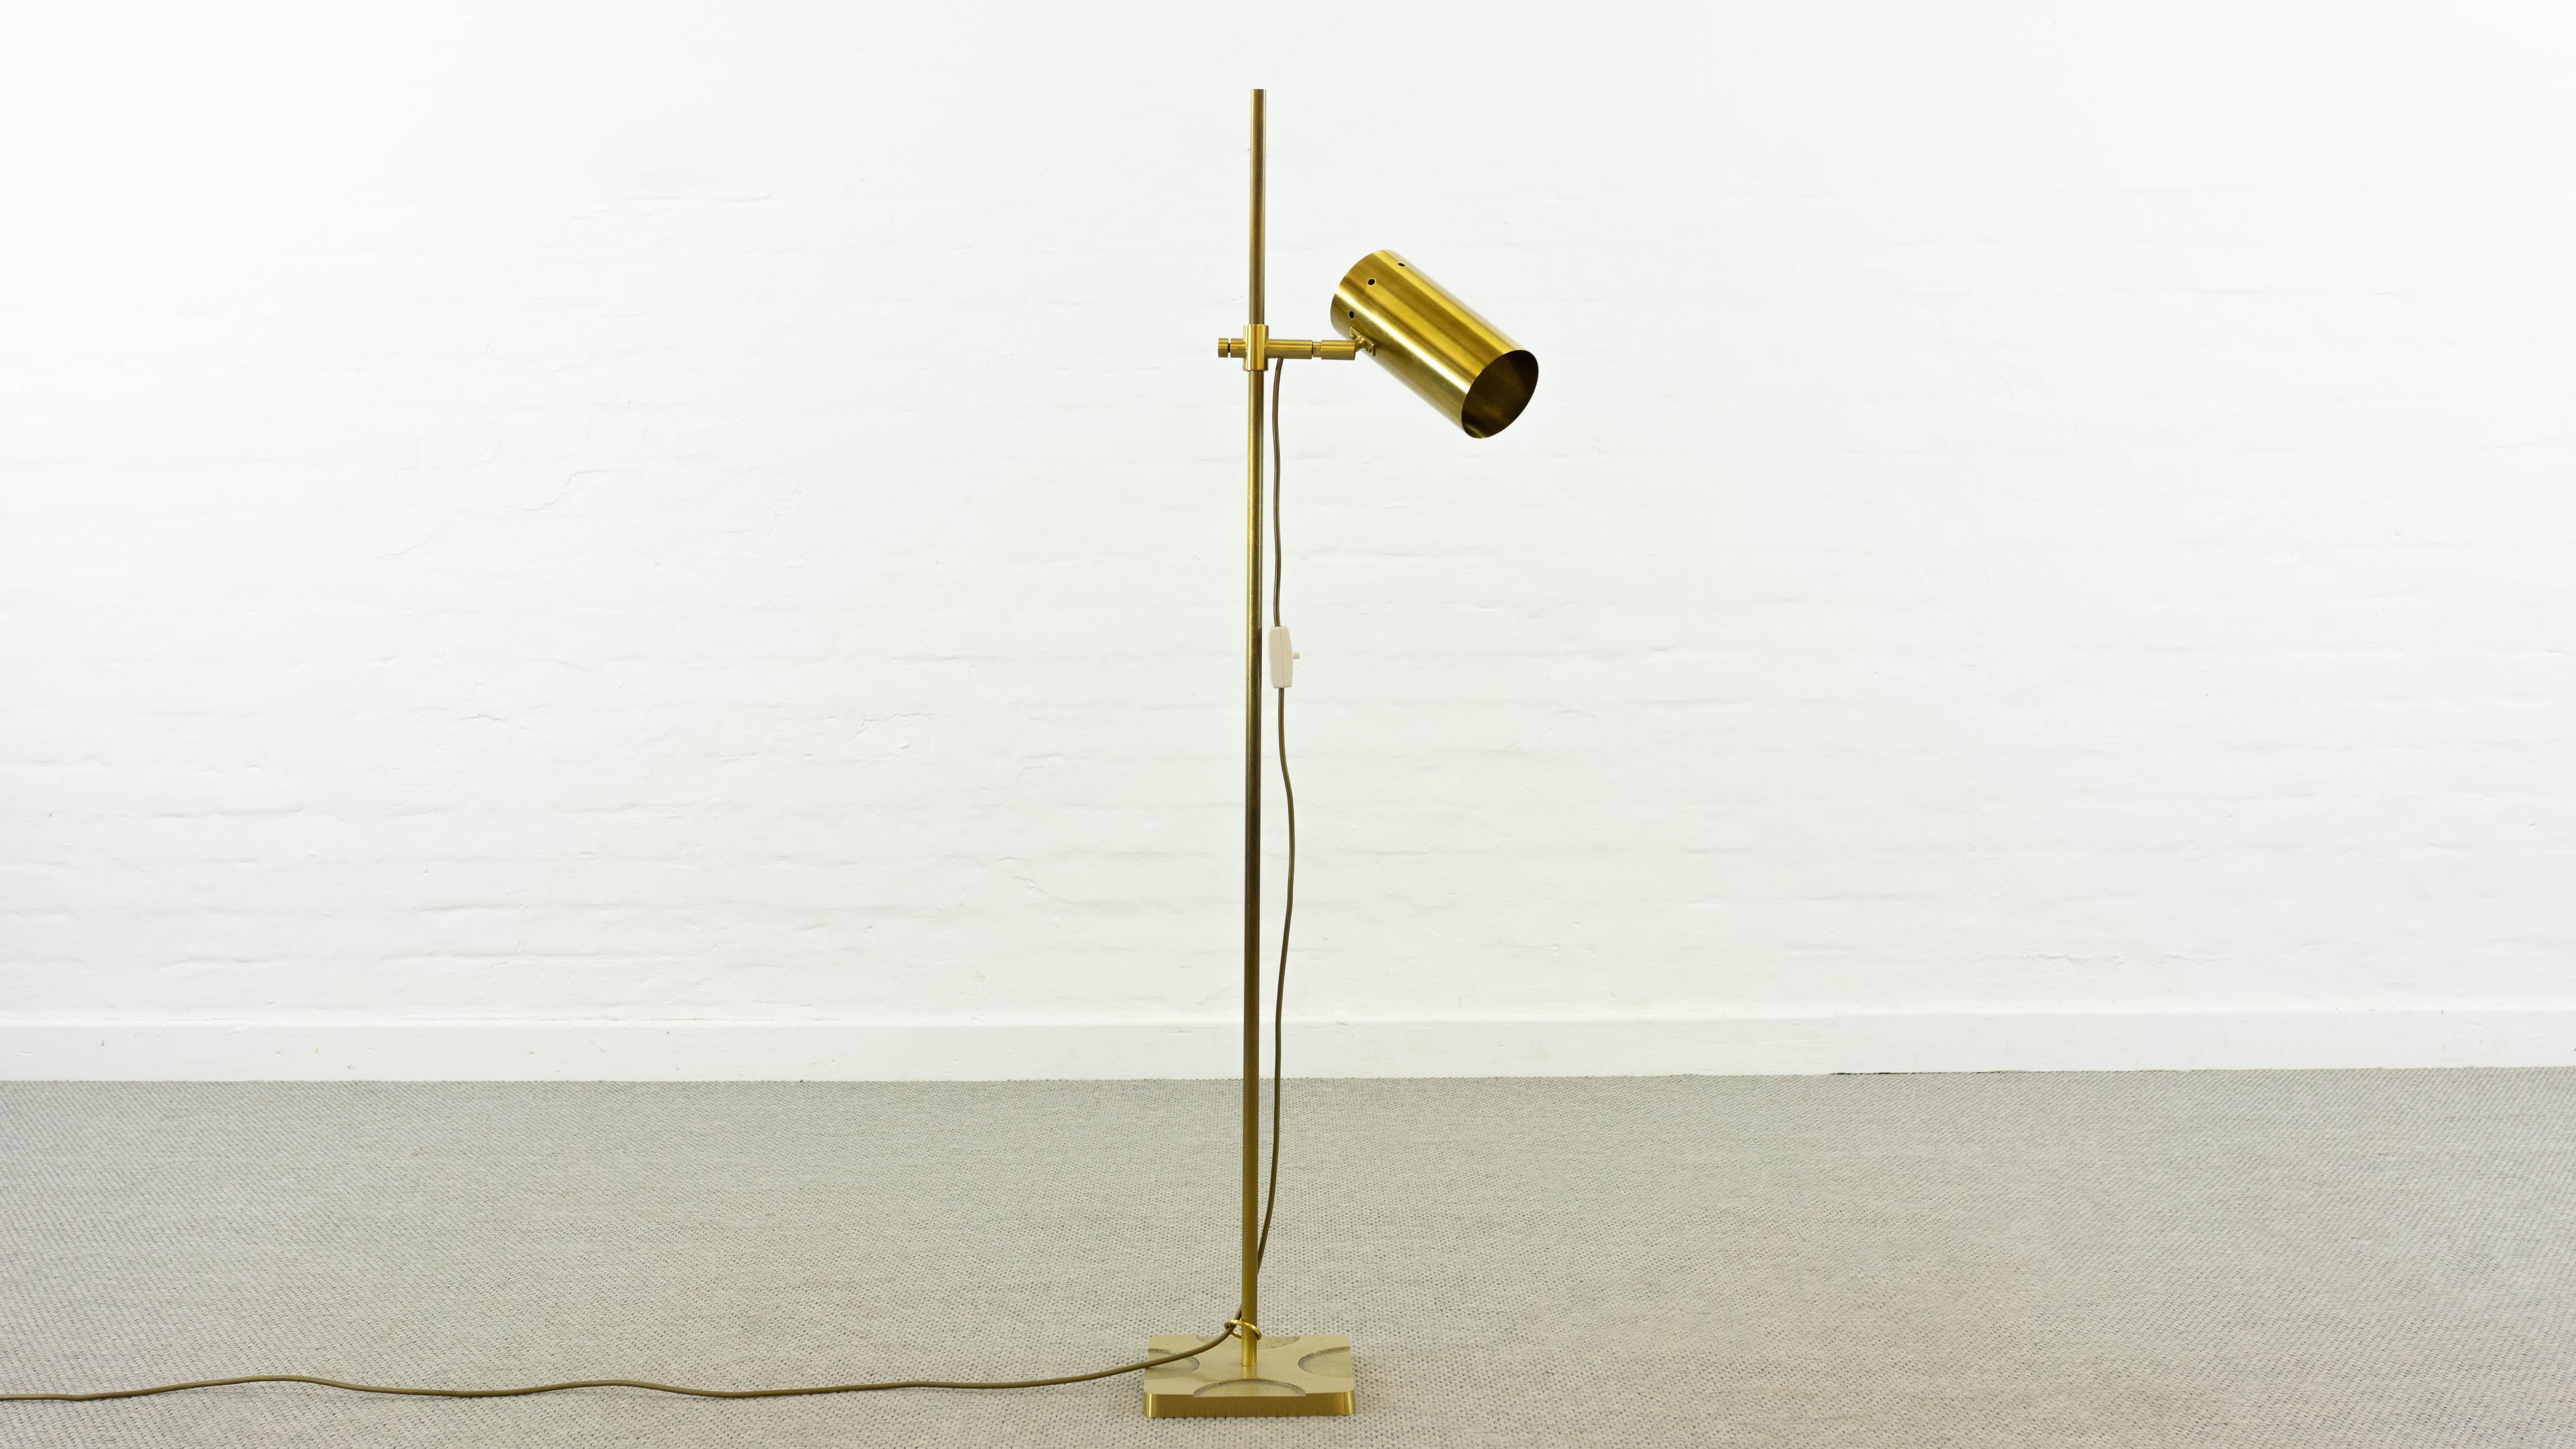 Adjustable Floorlamp / Spot from the 60s. Designer and Manufacturer unknown. Quite similar to the designs of Jo Hammerborg / Fog & Morup, Height 129cm, Spotdiameter 10cm, Spotlength 20cm. E27 Socket. Germany Plug. Minor signs of use and age.